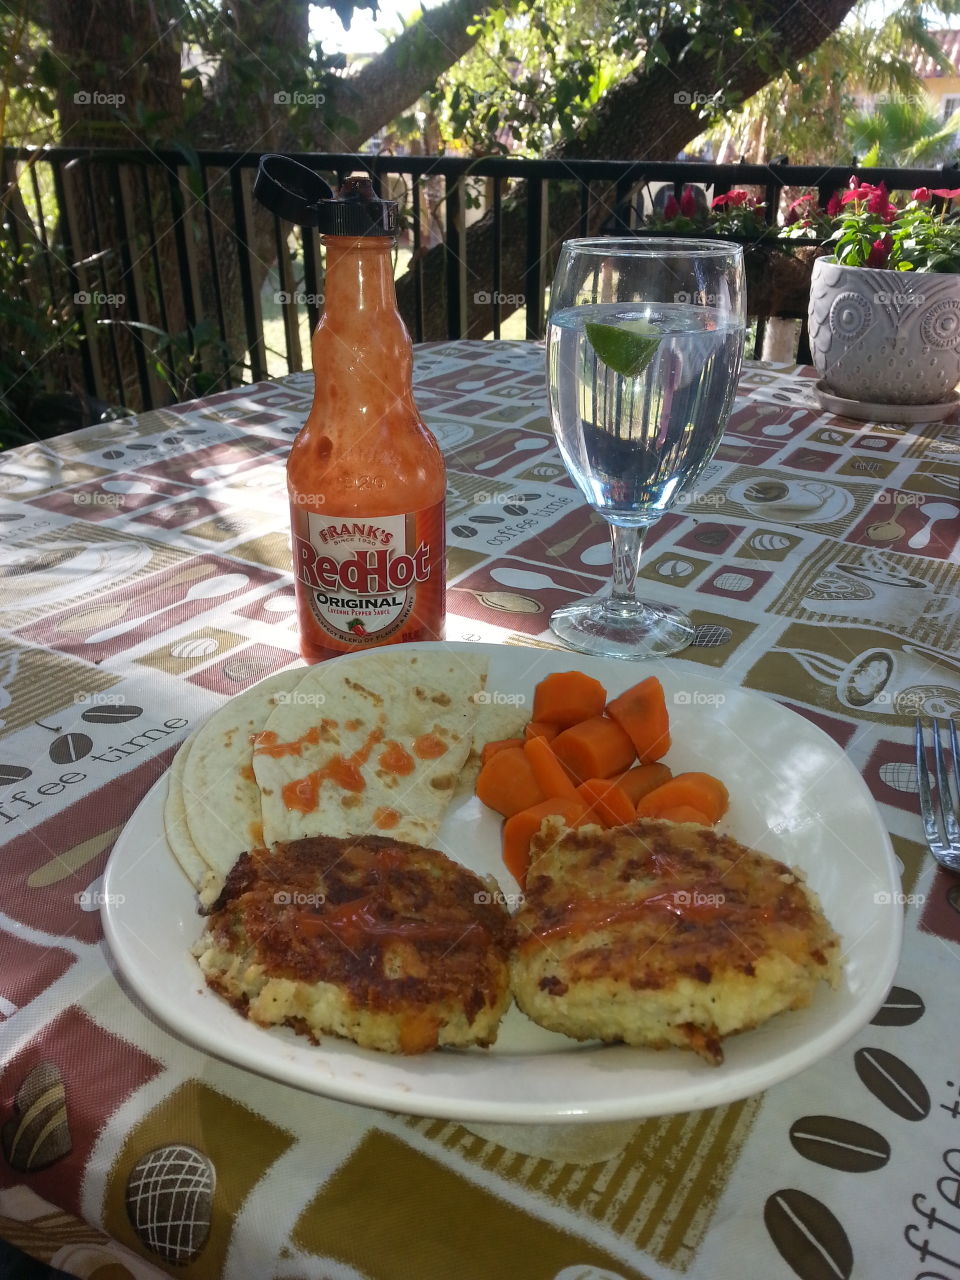 Franks Redhot recipes for Spring and Summer